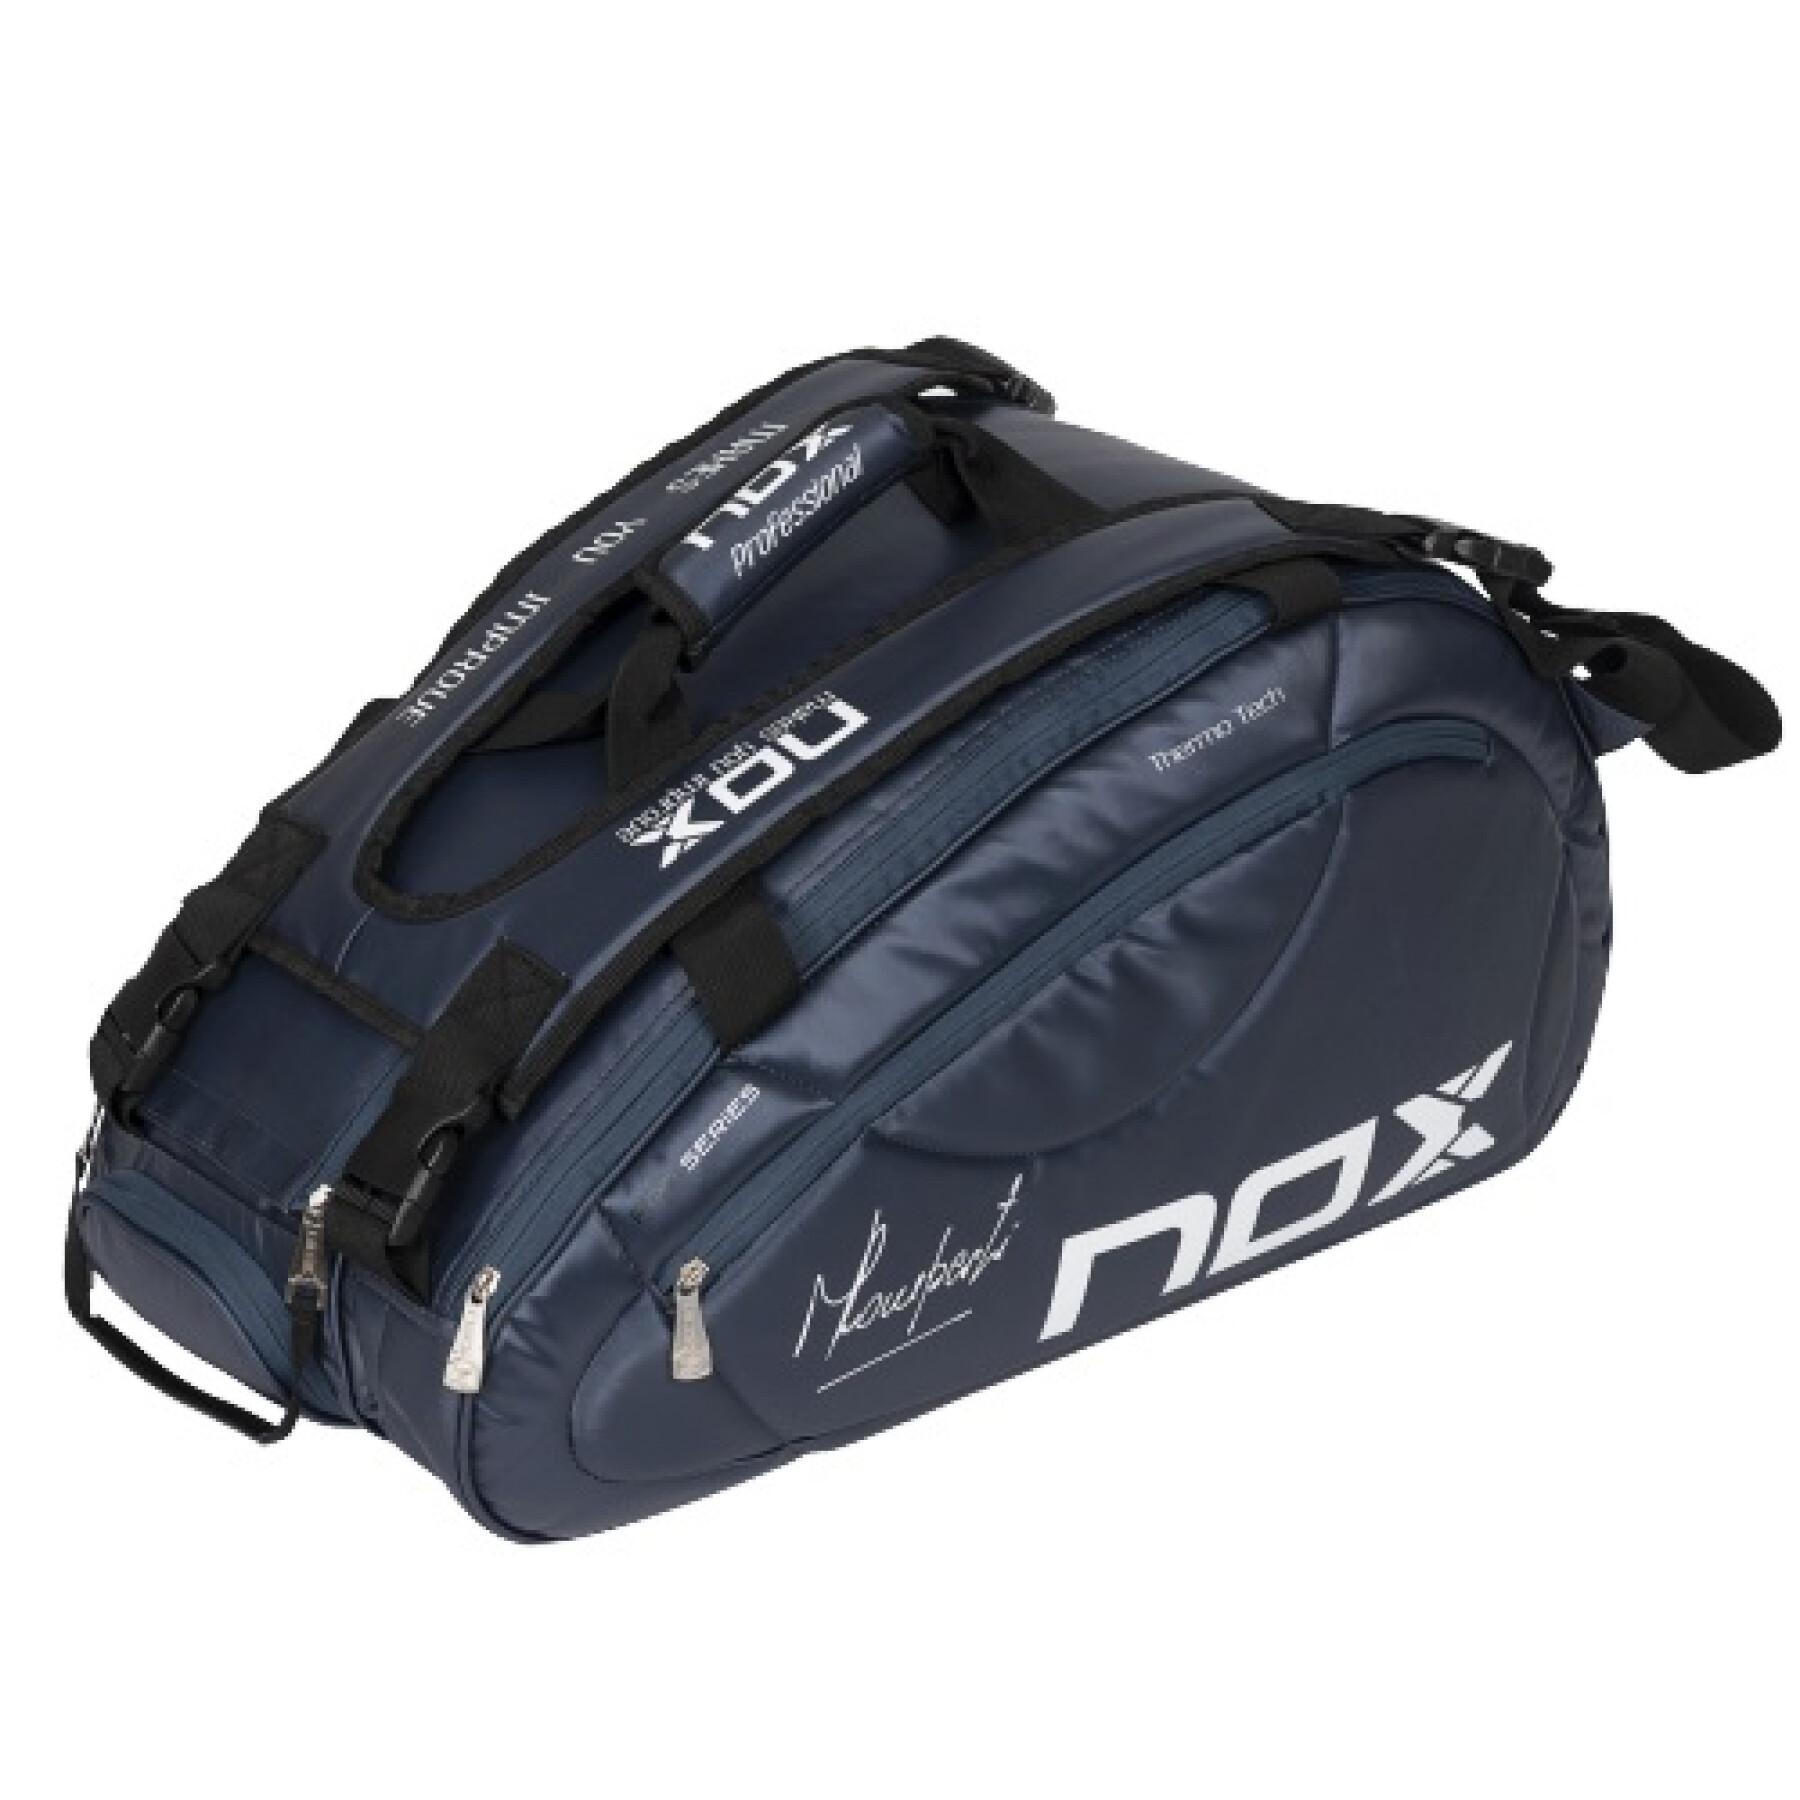 Paddle bag Nox Thermo Tour